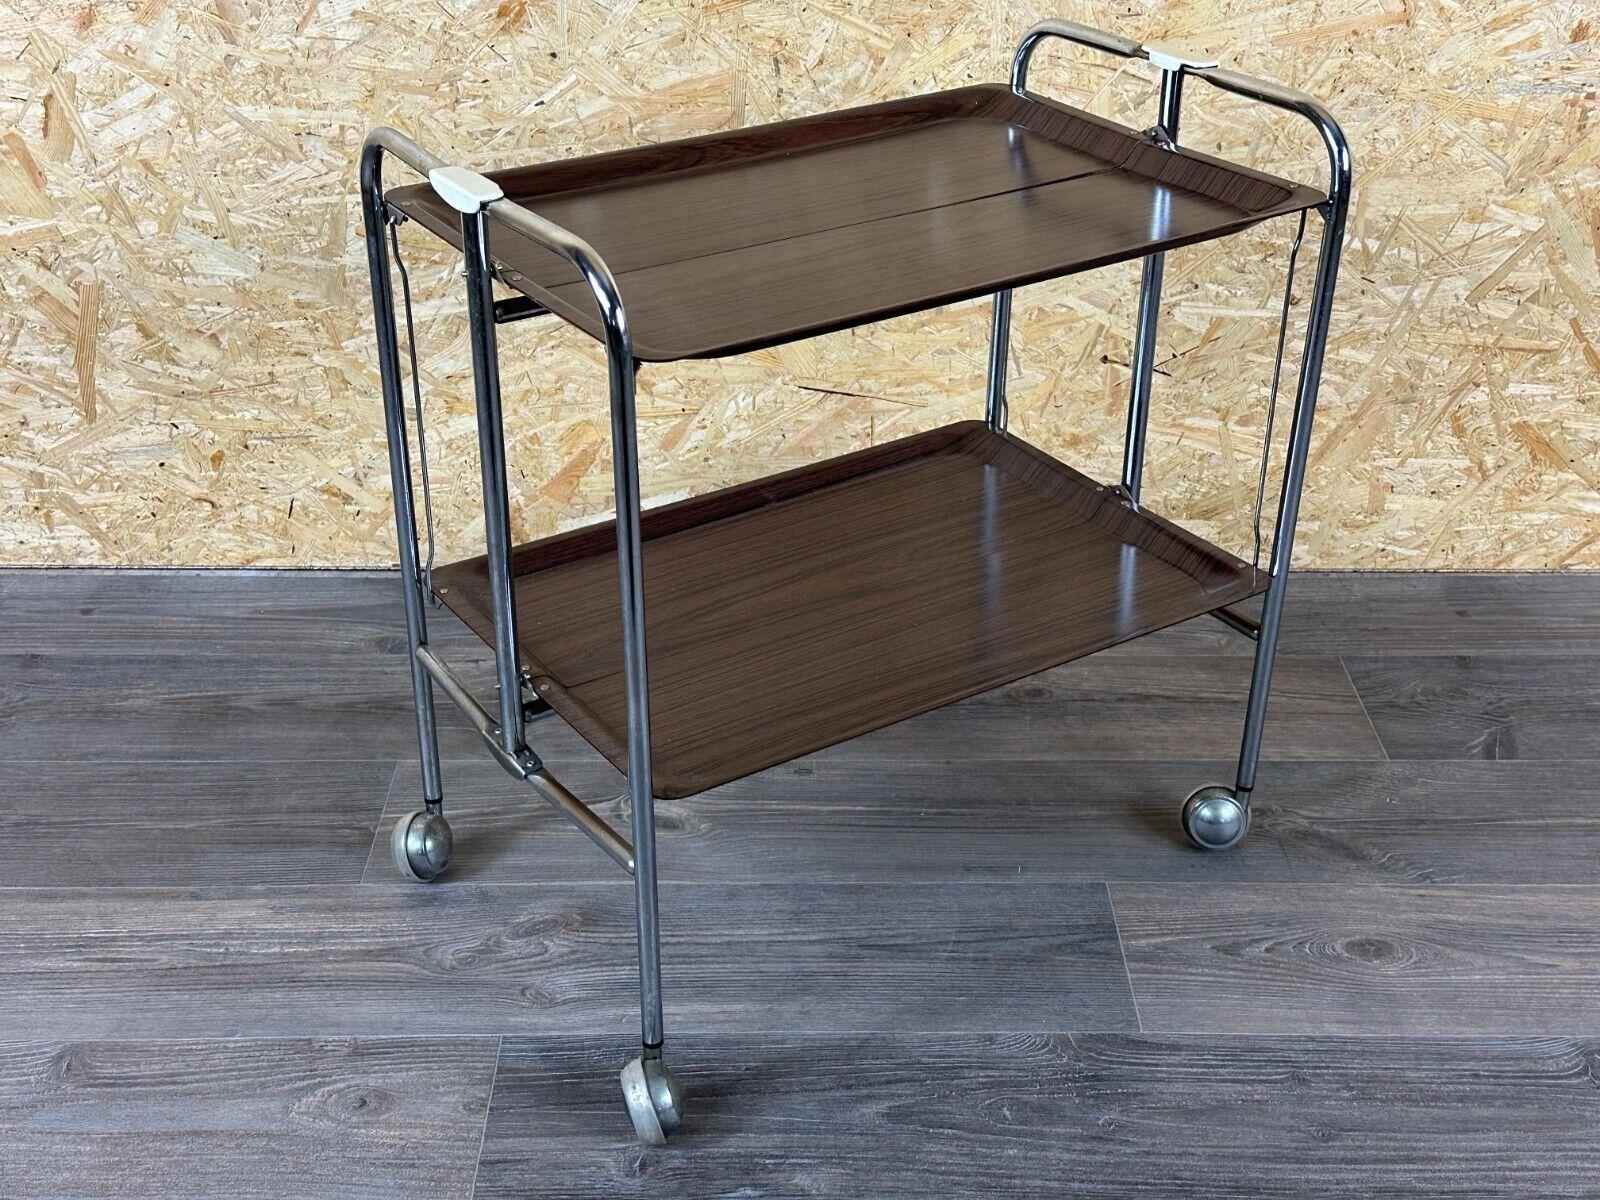 60s 70s serving trolley dinette side table space age brown design im Angebot 4